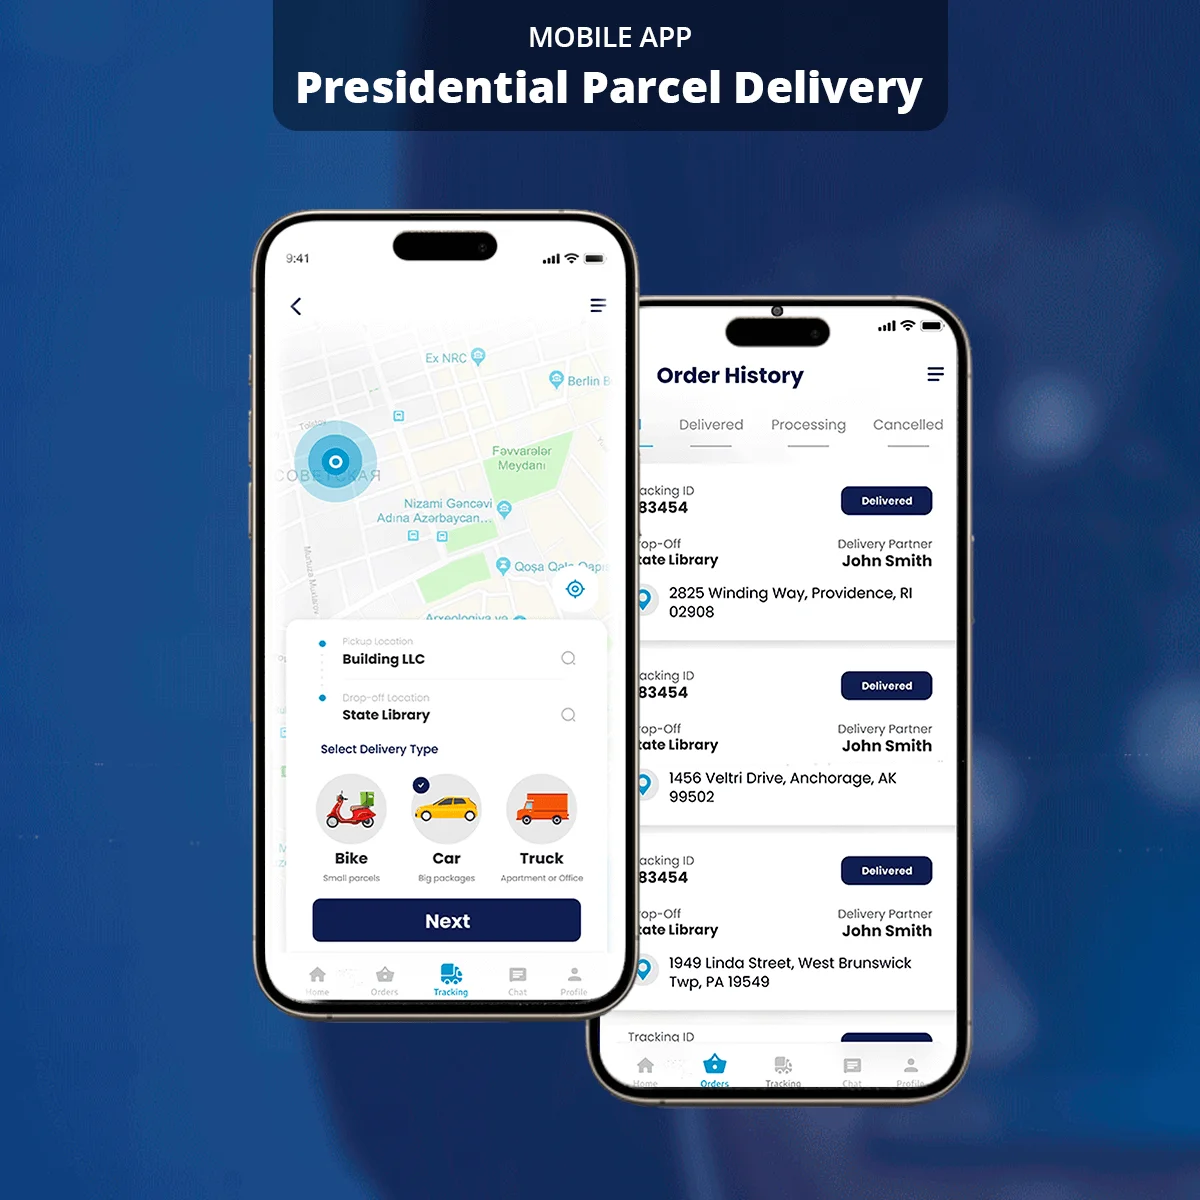 Presidential Parcel Delivery